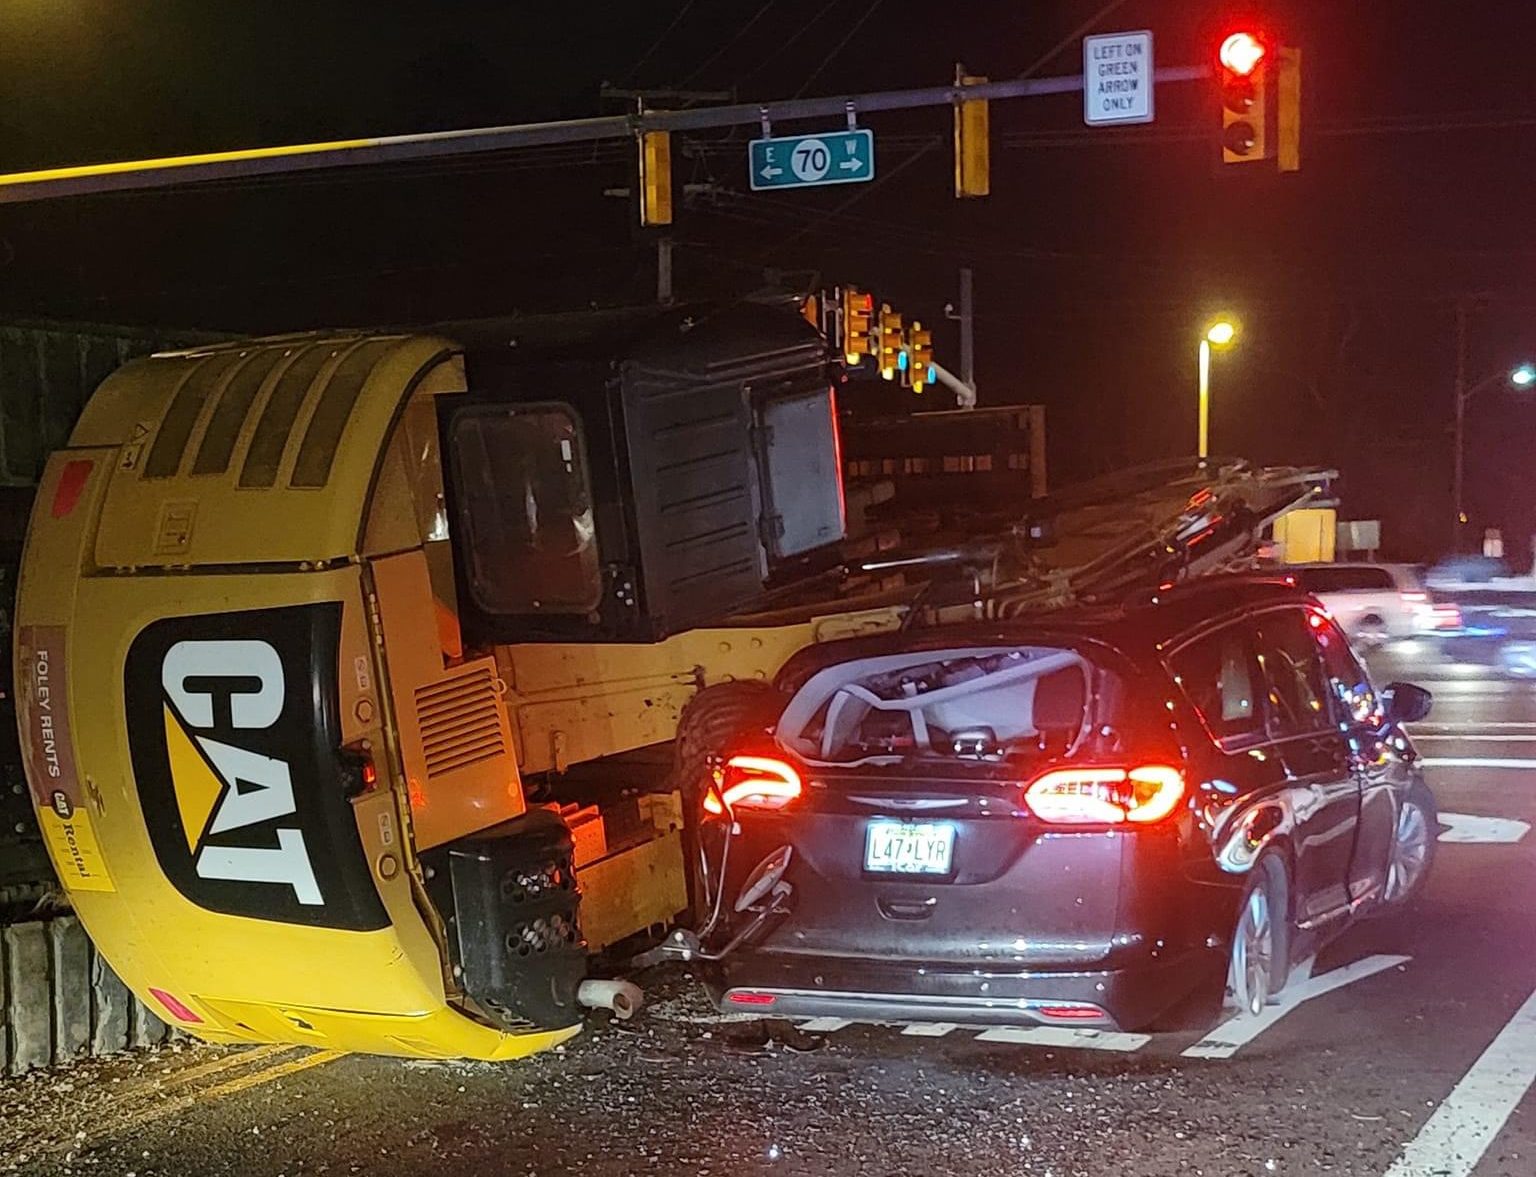 An accident in Toms River, N.J. (Credit: Ray Perez)